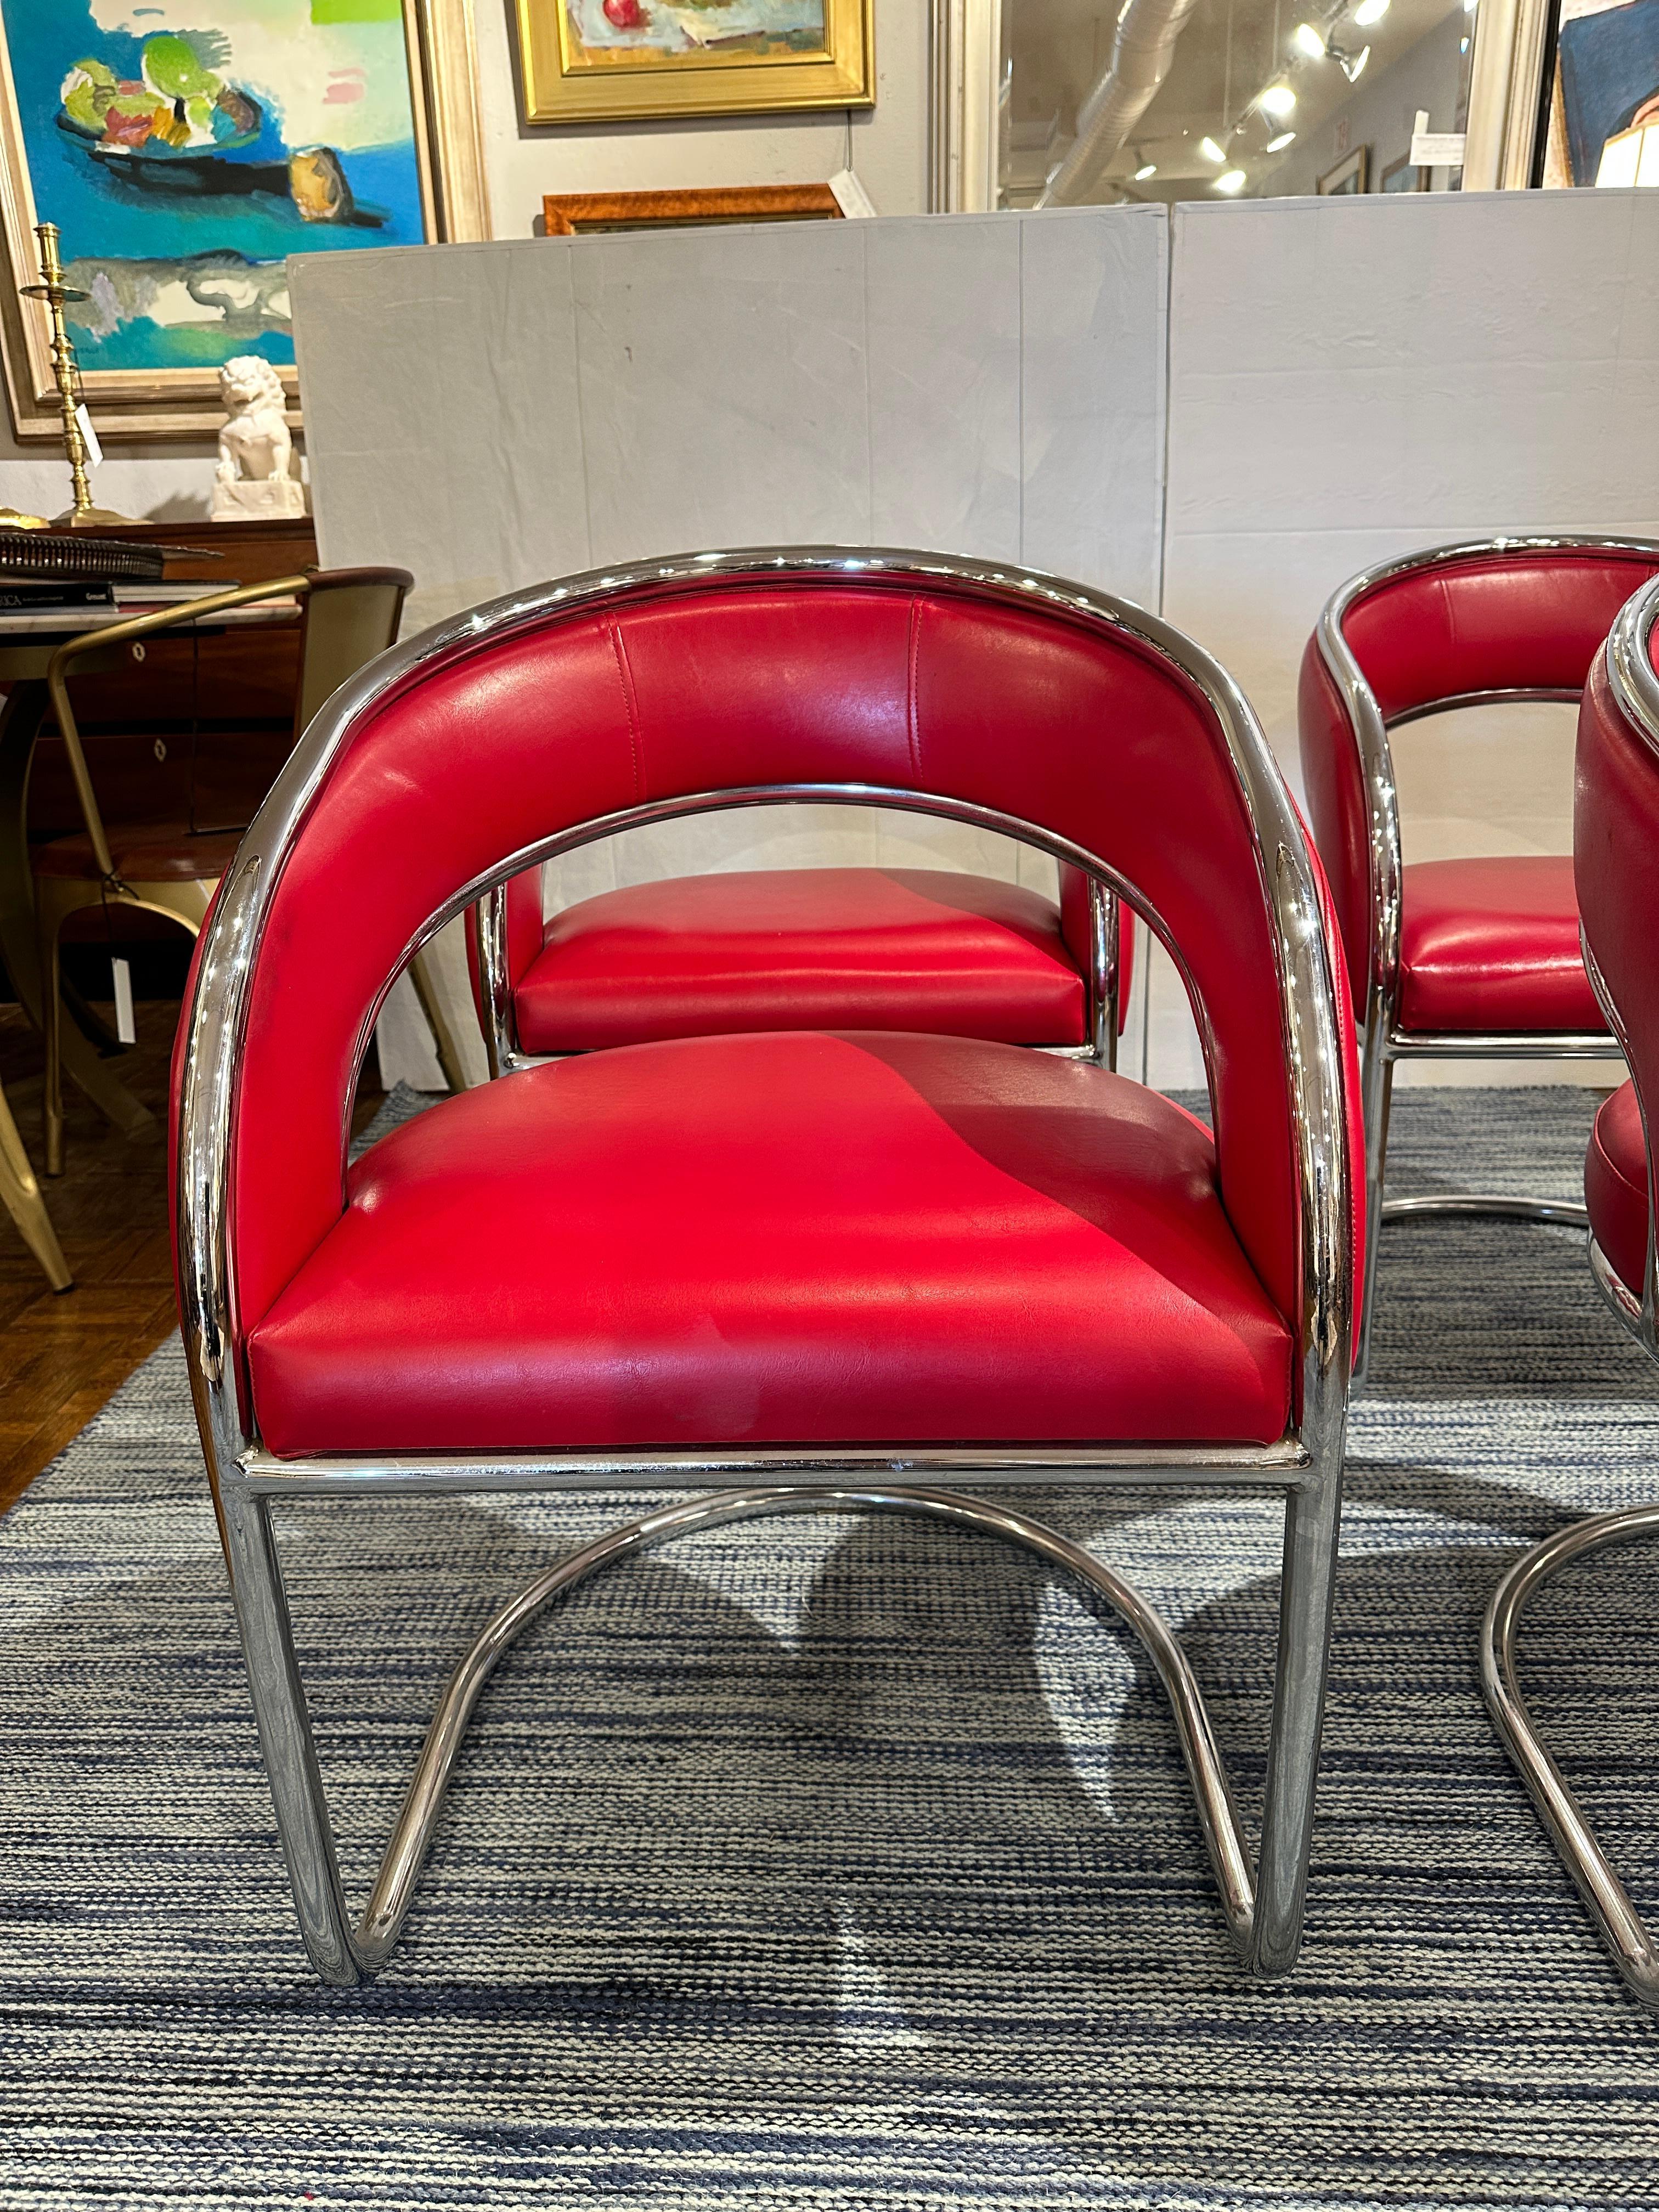 Set of 4.  Mid Century Modern chairs from 1960s.  Upholstered in Bright cheerful red  leather, framed in shiny chrome.  Very comfortable as lounging or game table chairs.  In great condition.